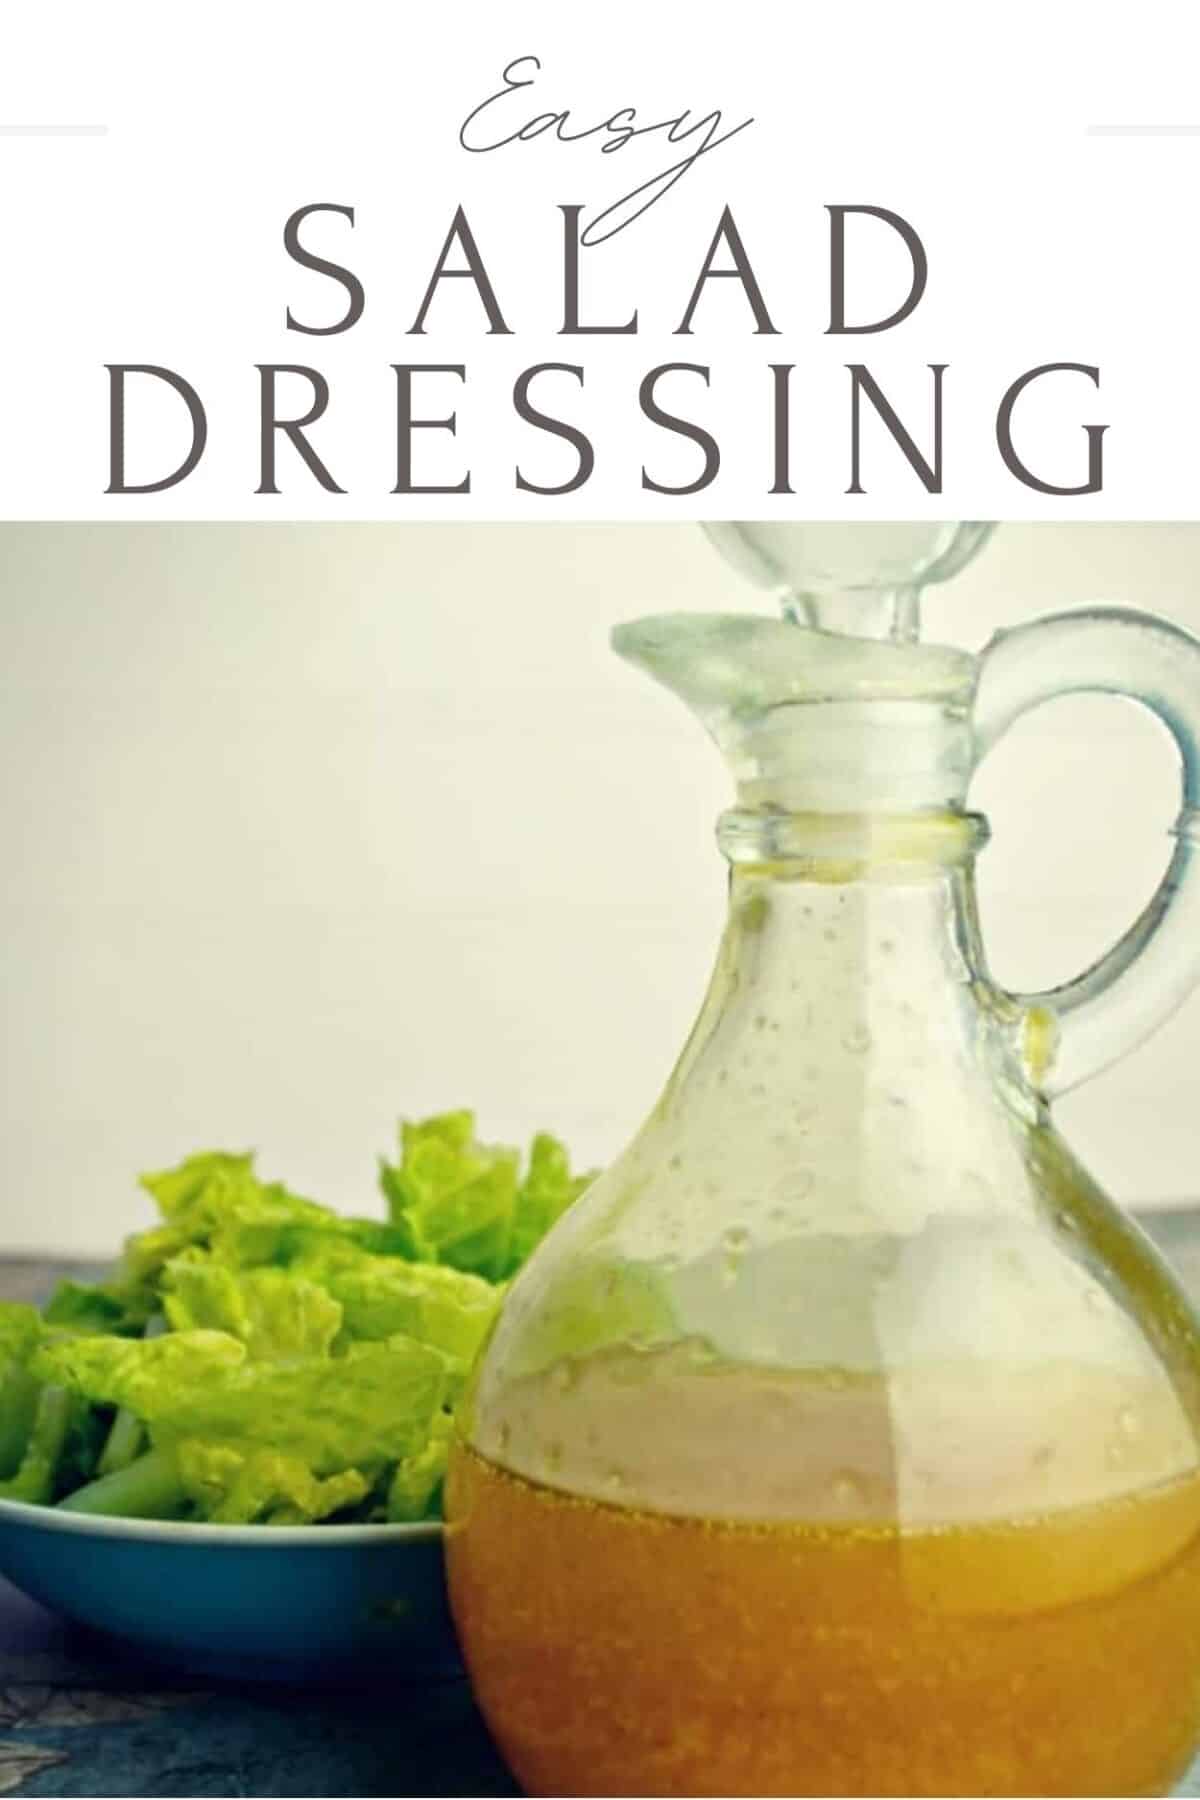 Looking for an easy dressing recipe that you can make quickly with very few ingredients? This is one of my favorite go-to recipes when I need something to top my salad.